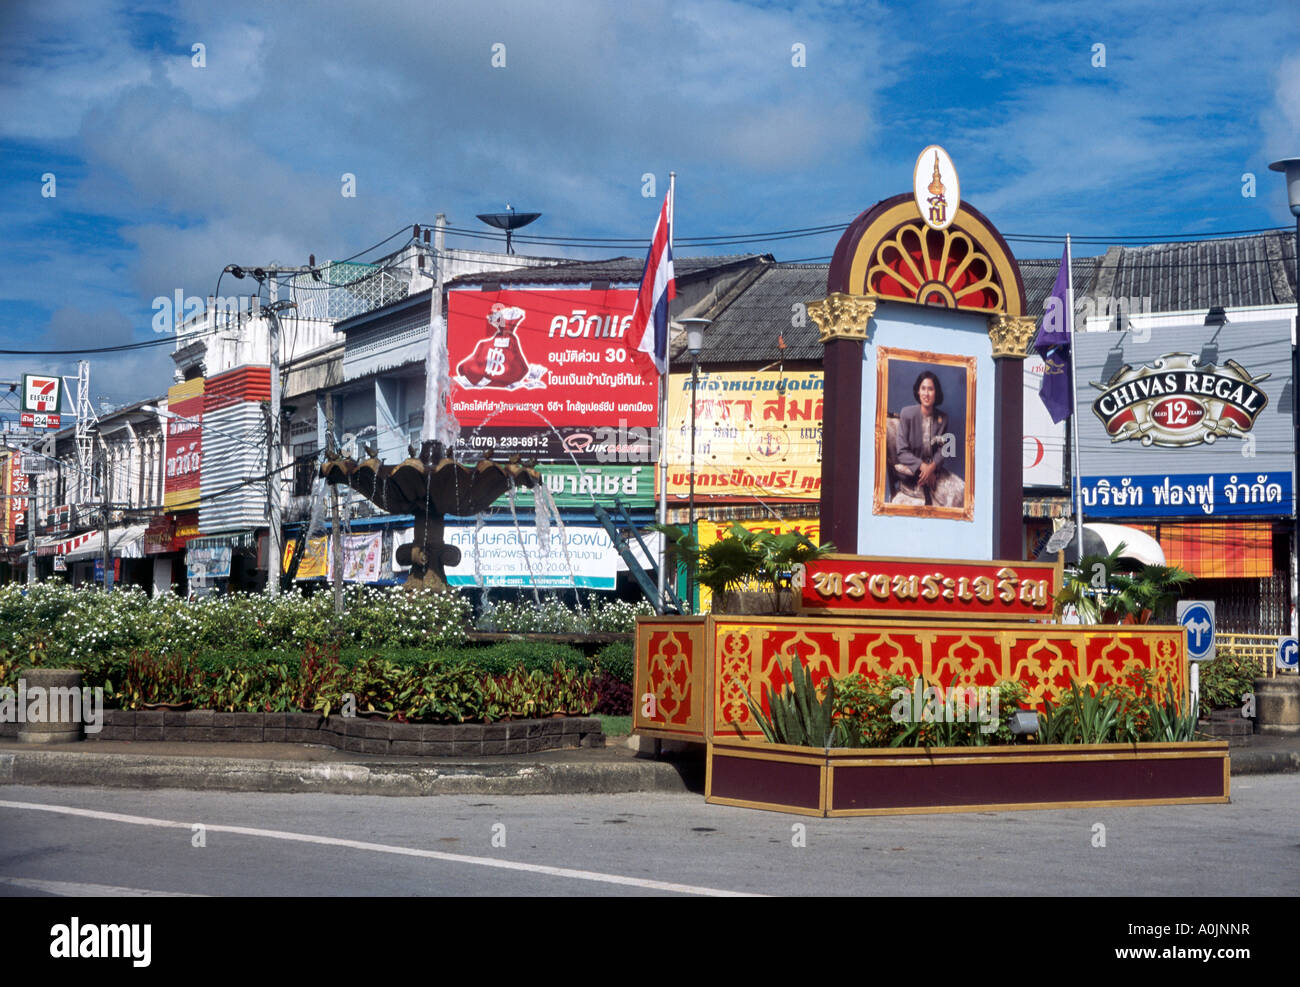 The Fountain Roundabout in Phuket town on Phuket Island with shops lining the street behind Stock Photo